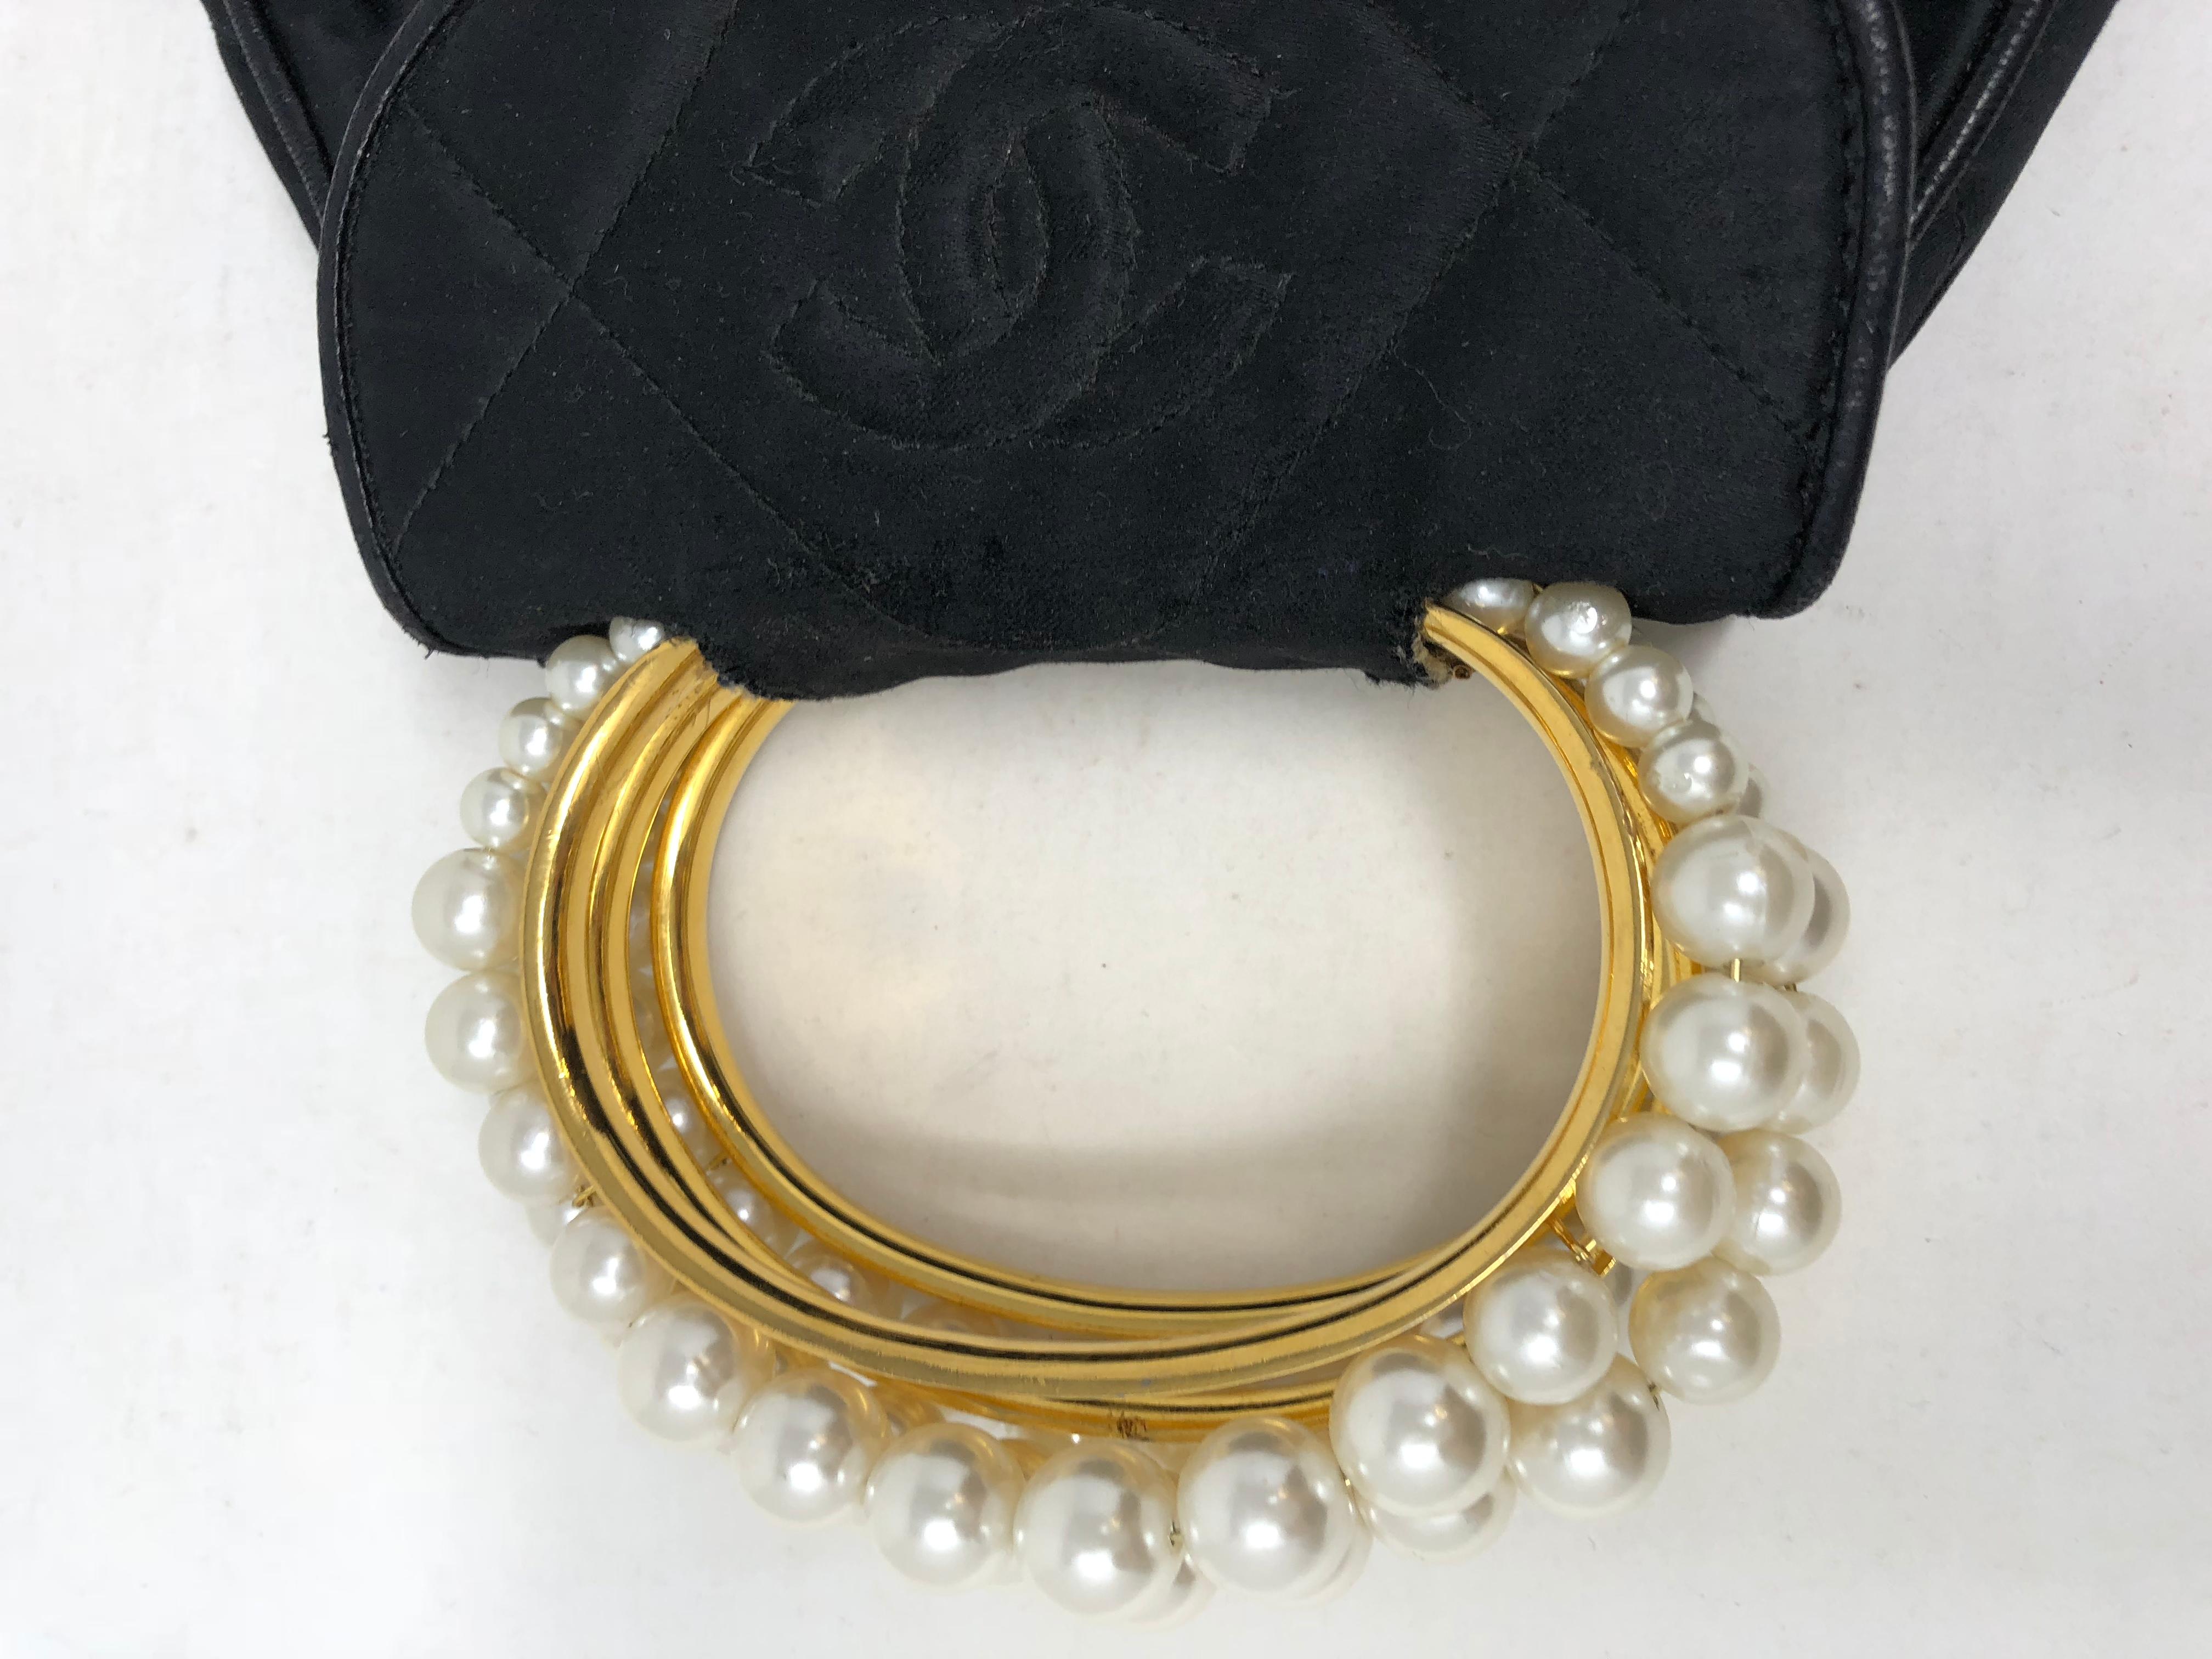 Women's or Men's Chanel Satin and Pearl Handle Bag